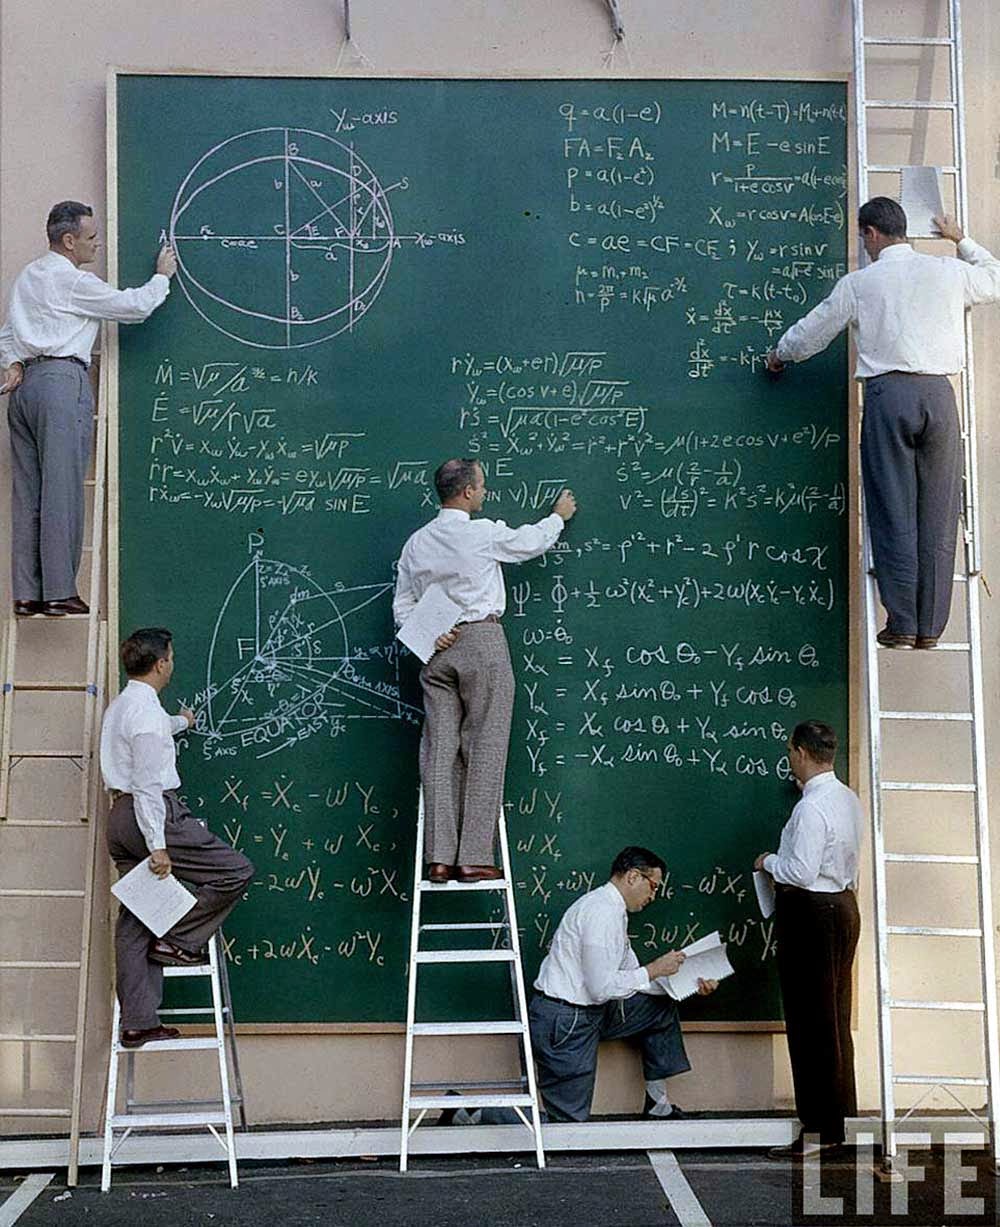 NASA+scientists+with+their+board+of+calculations,+1961.2.jpg